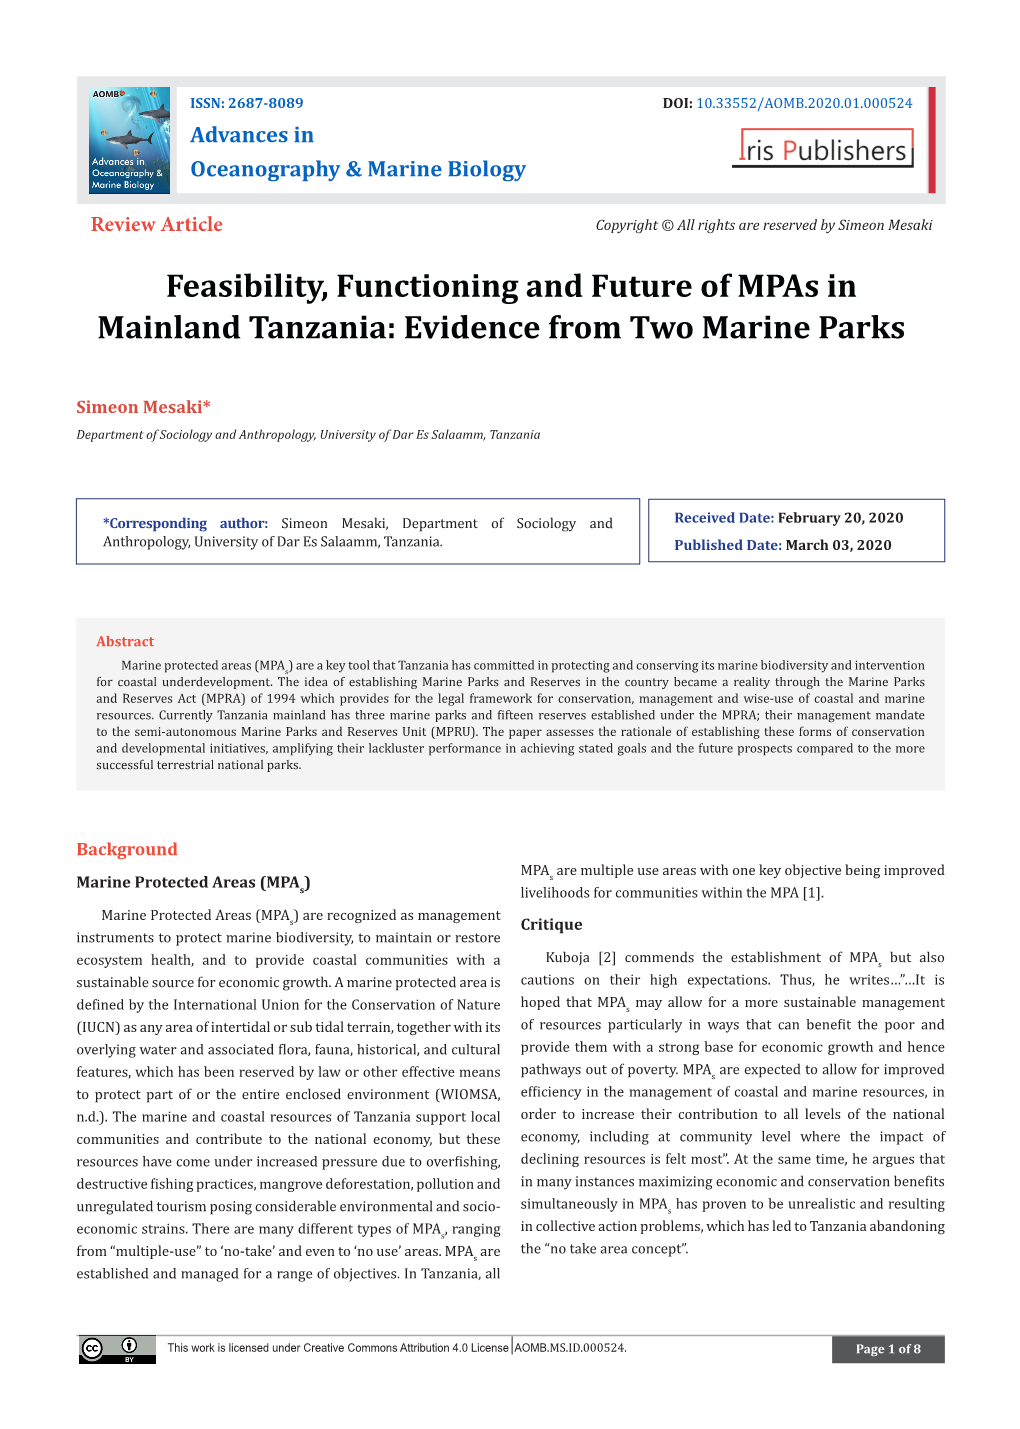 Feasibility, Functioning and Future of Mpas in Mainland Tanzania: Evidence from Two Marine Parks